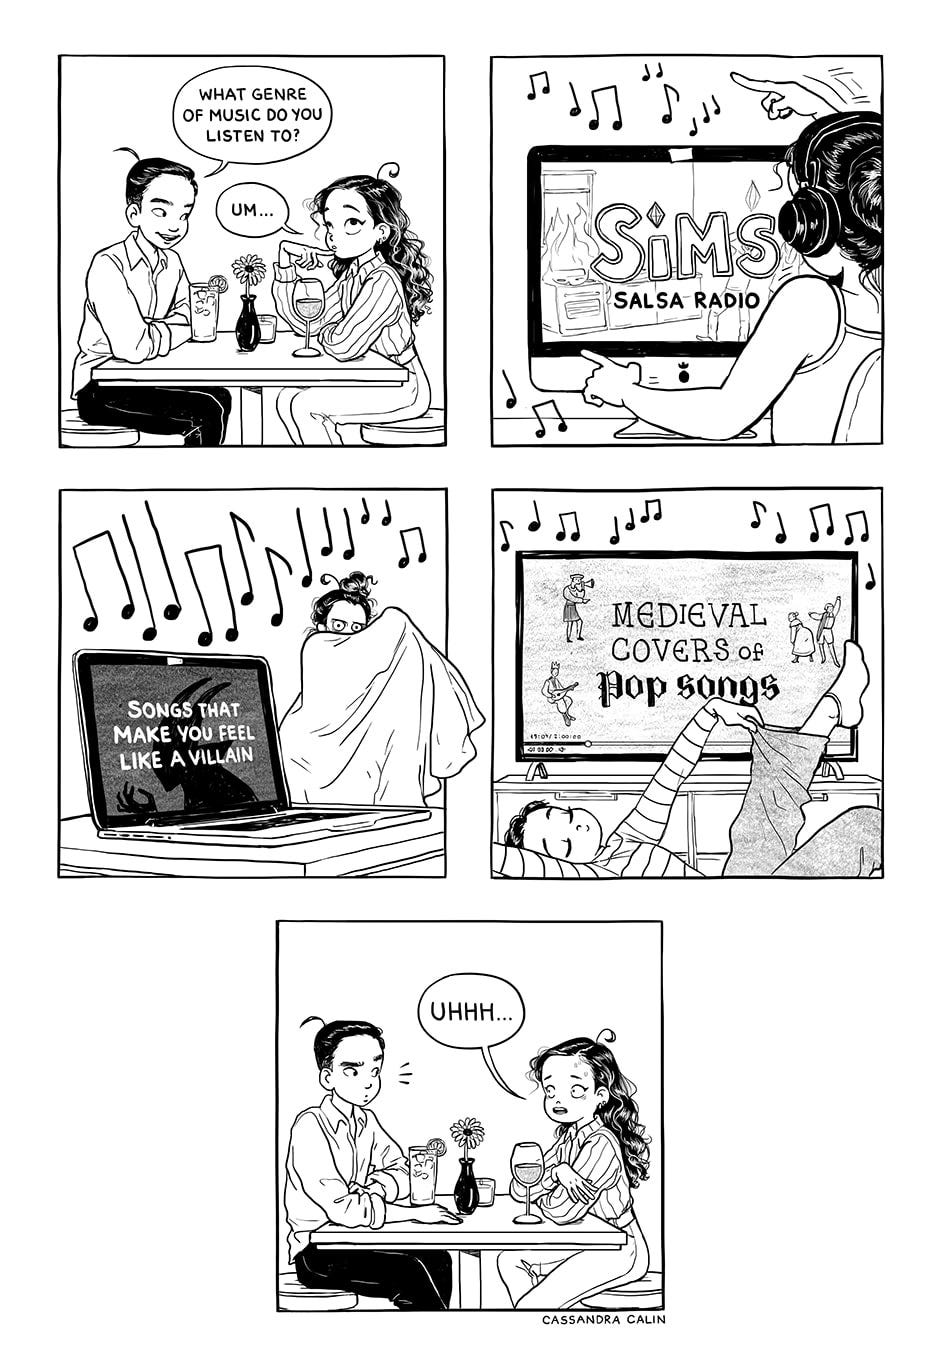 A comic by Cassandra Calin with five panels, the first one showing a female-presenting figure sitting at a table with a male-presenting figure, him saying ‘What genre of music do you listen to?’ and her replying ‘Um…’. The second panel shows the female figure wearing headphones and sitting at a computer with the words ‘Sims salsa radio’ on the screen. The third panel shows the same figure wearing a blanket like a cape, a laptop open nearby with the words ‘Songs that make you feel like a villain’ on the screen. The fourth panel shows the same figure again with a TV screen showing the words ‘Medieval covers of pop songs’. The final panel shows the two figures form the first panel, with the female figure looking worried and saying ‘Uhhh…’